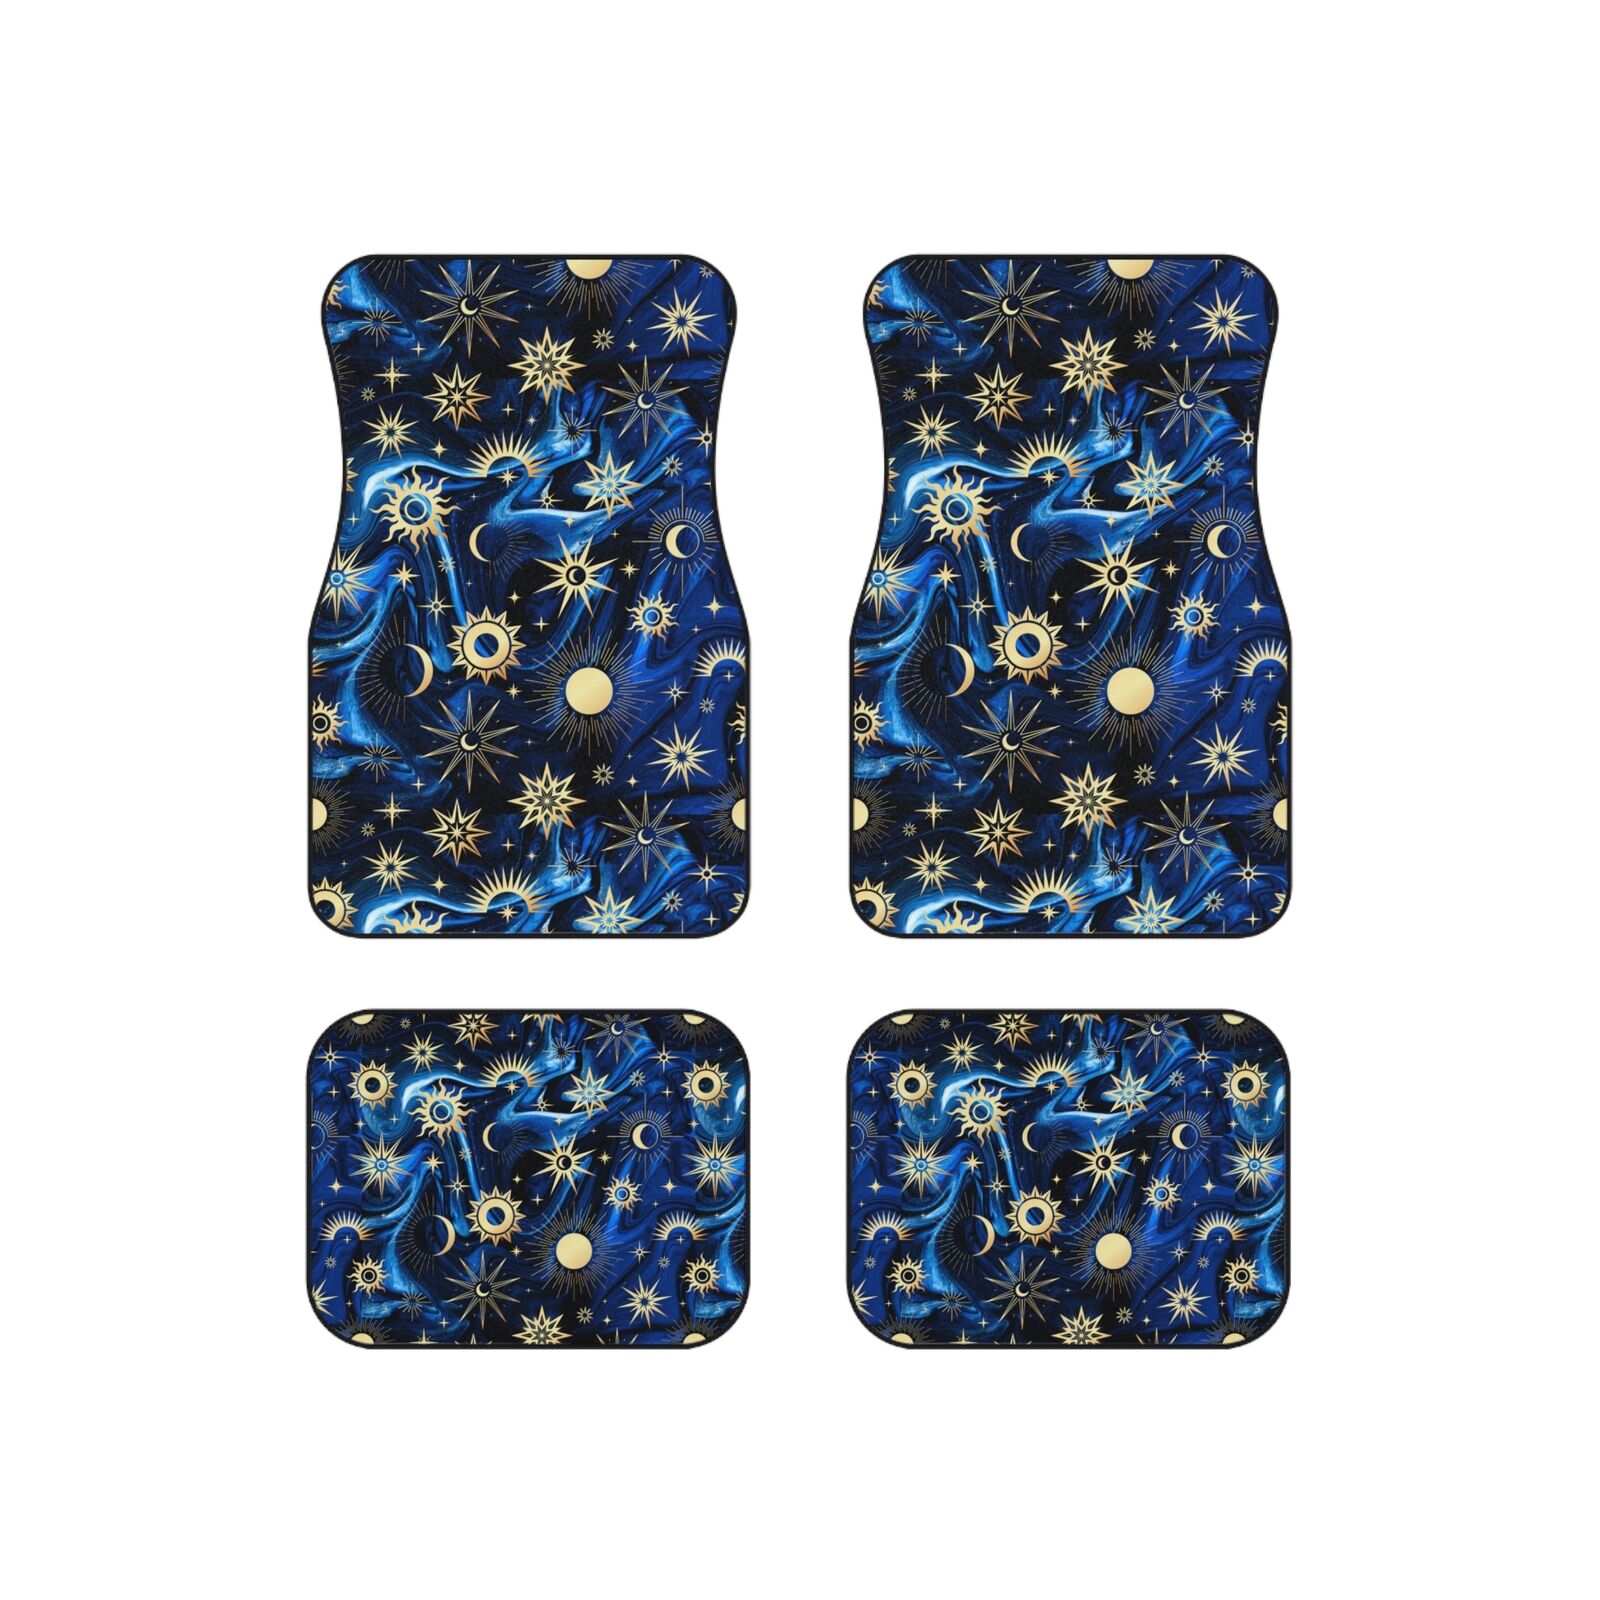 Celestial Blue and Black Stars, Moon, and Sun Car Mats (Set of 4), Easy to Clean